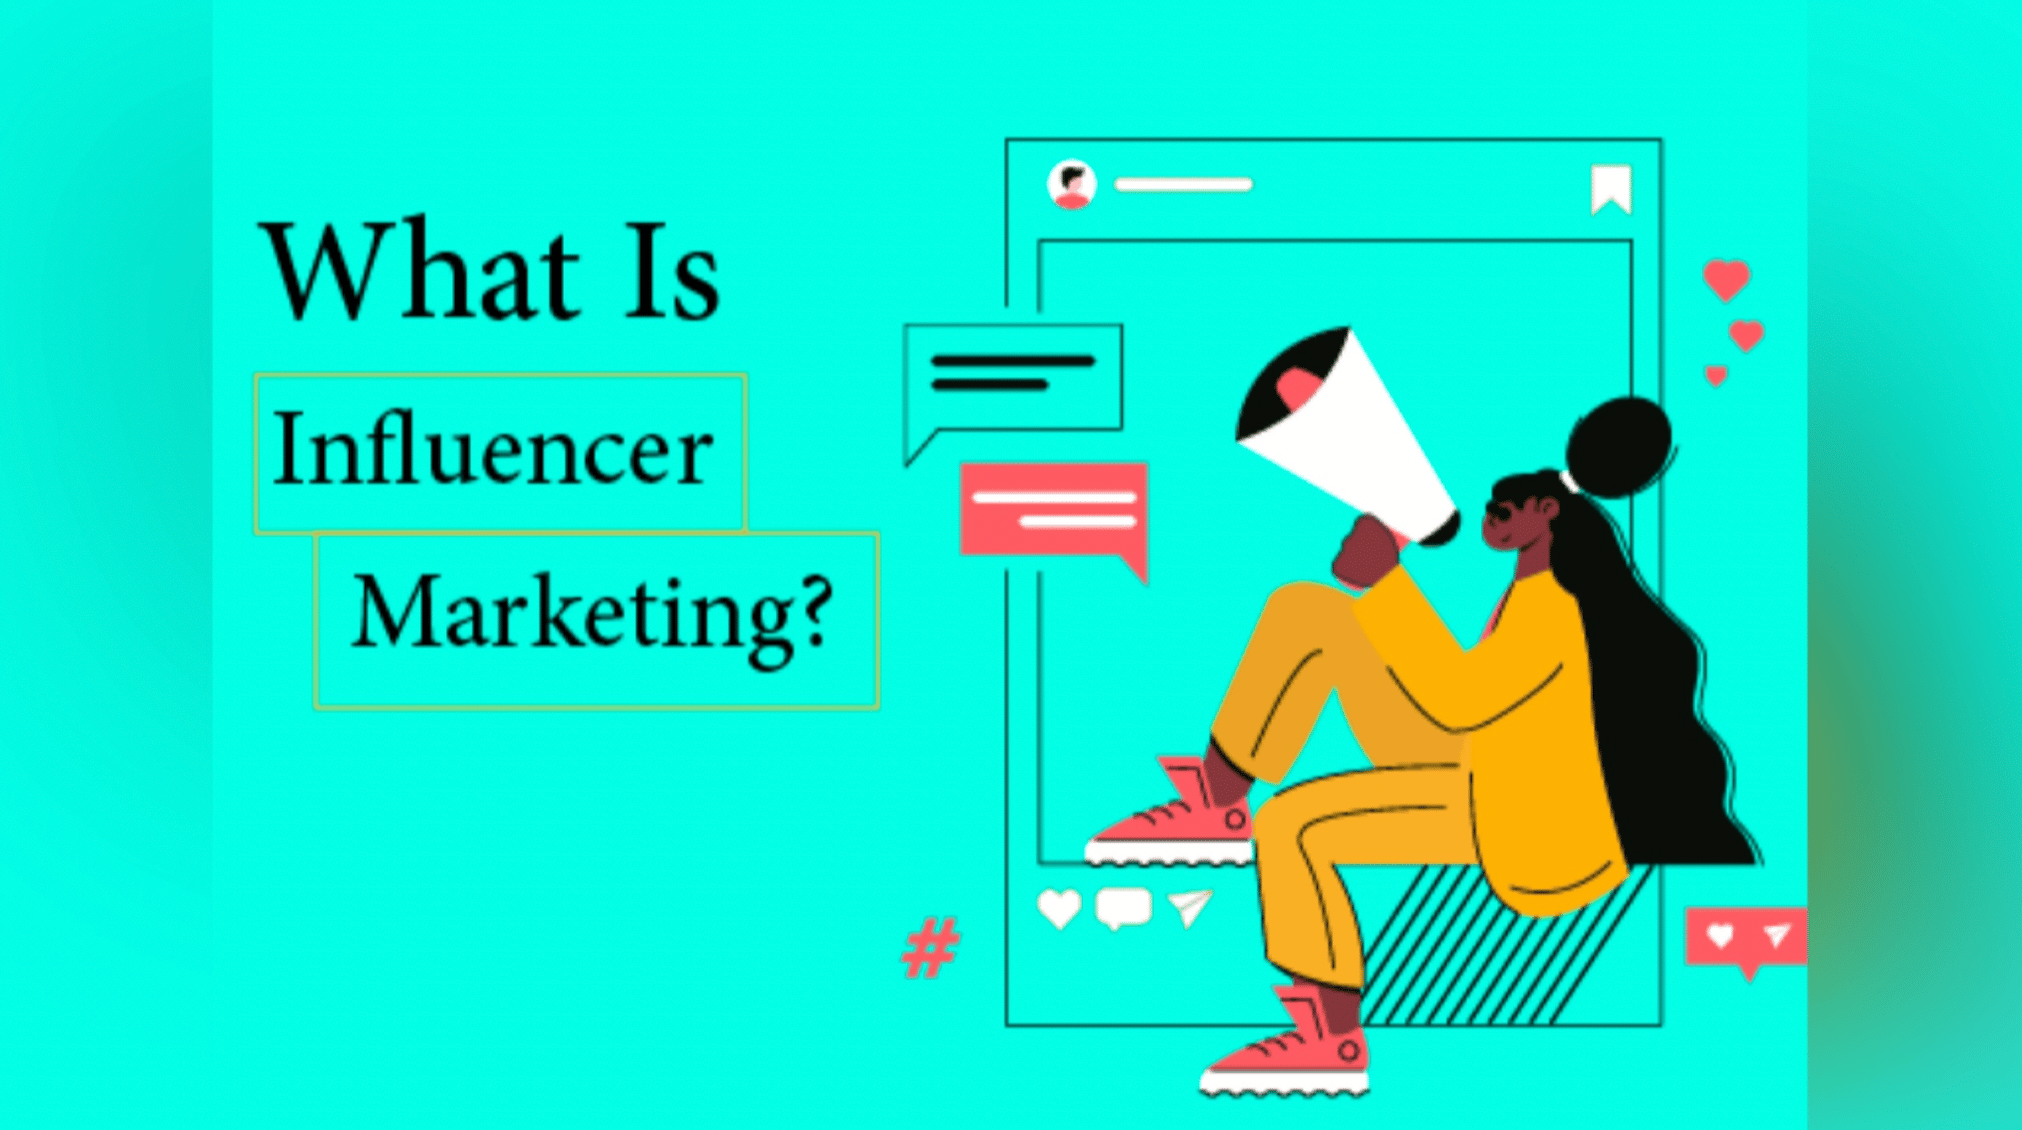 What Is Influencer Marketing?